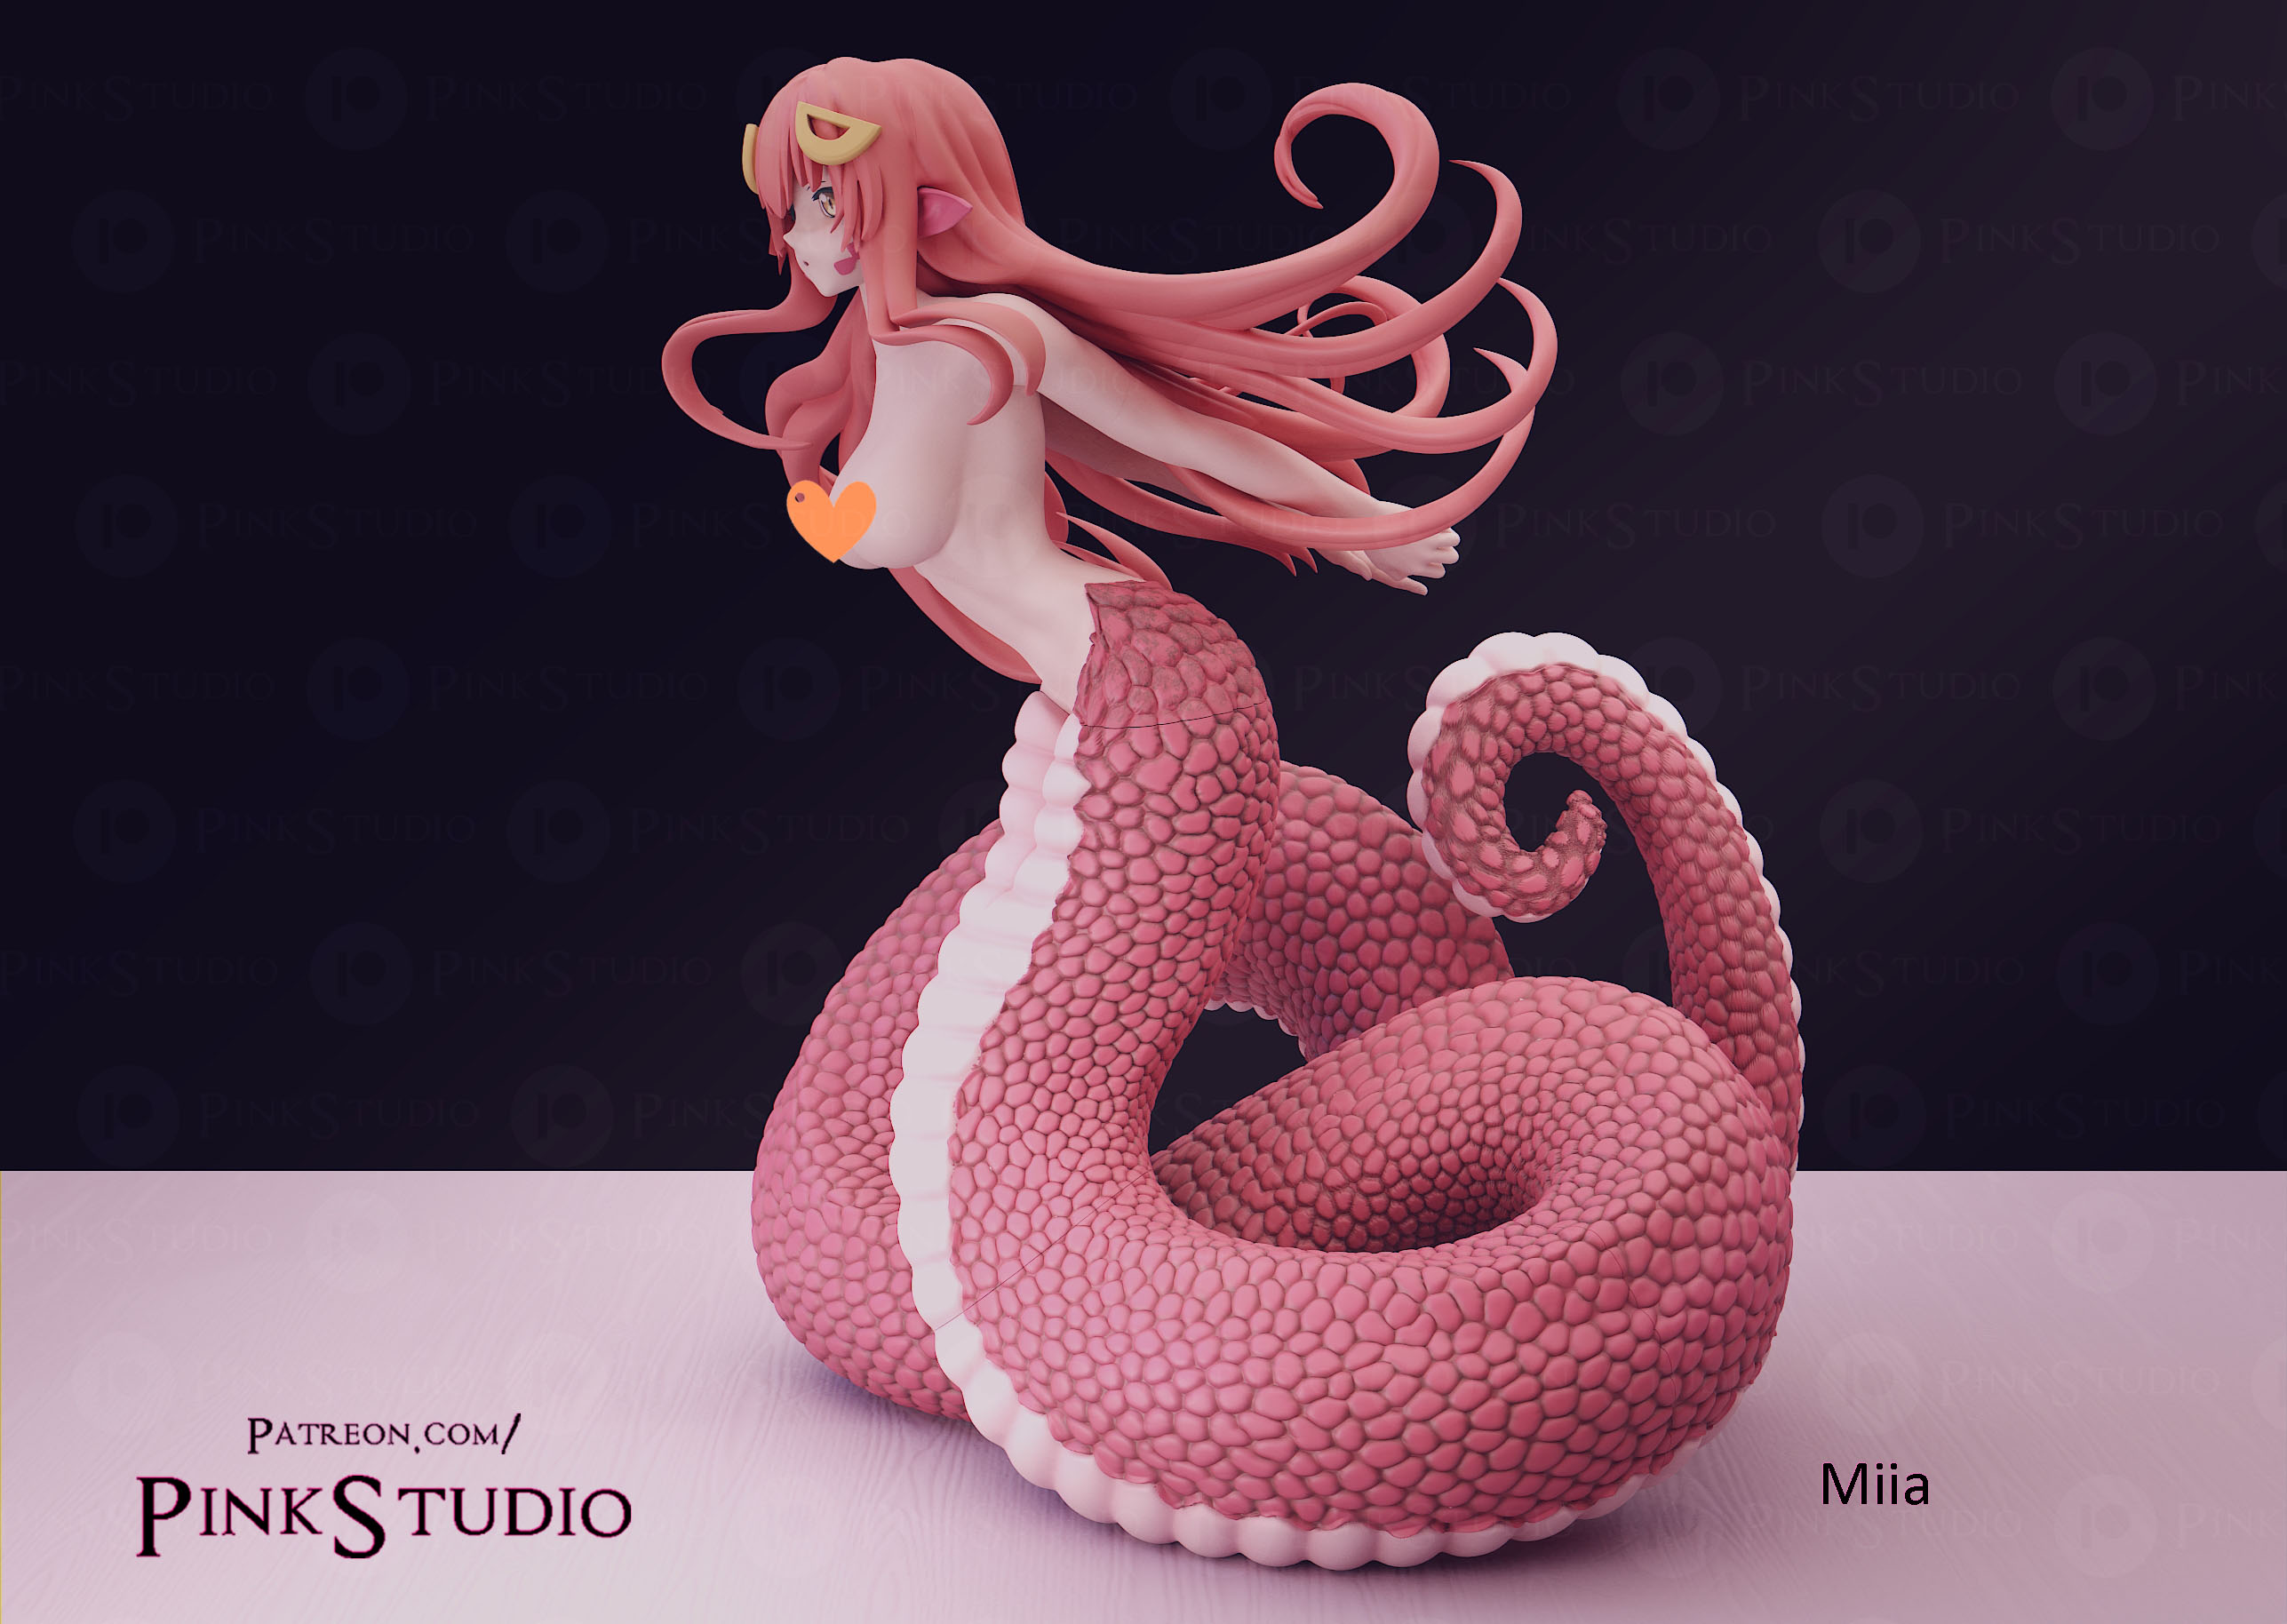 bhupendra ratre recommends monster musume miia pic